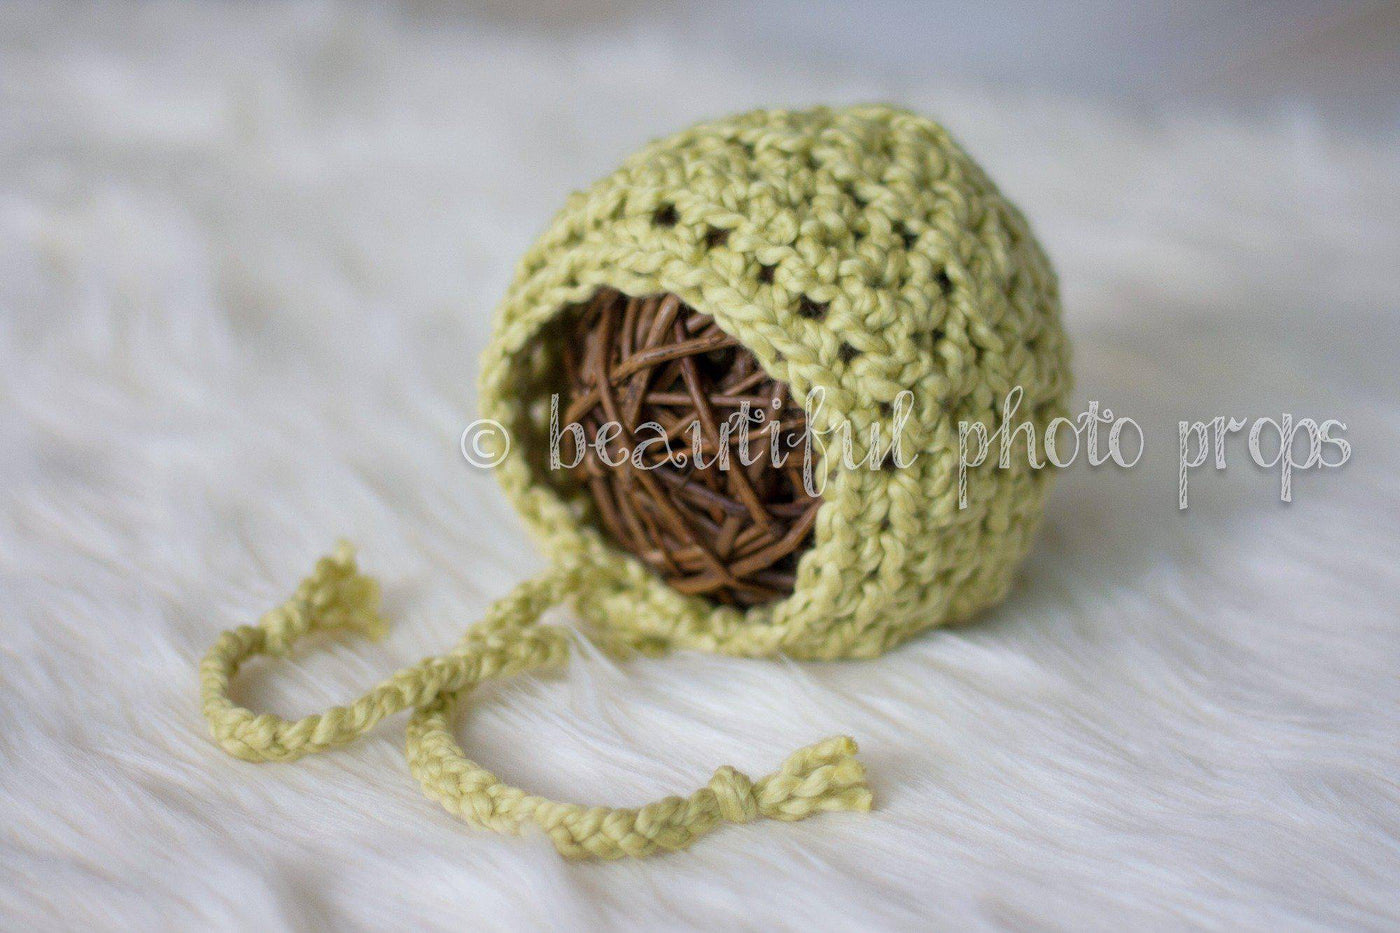 Simply Cotton Baby Bonnet in Dusty Sage - Beautiful Photo Props